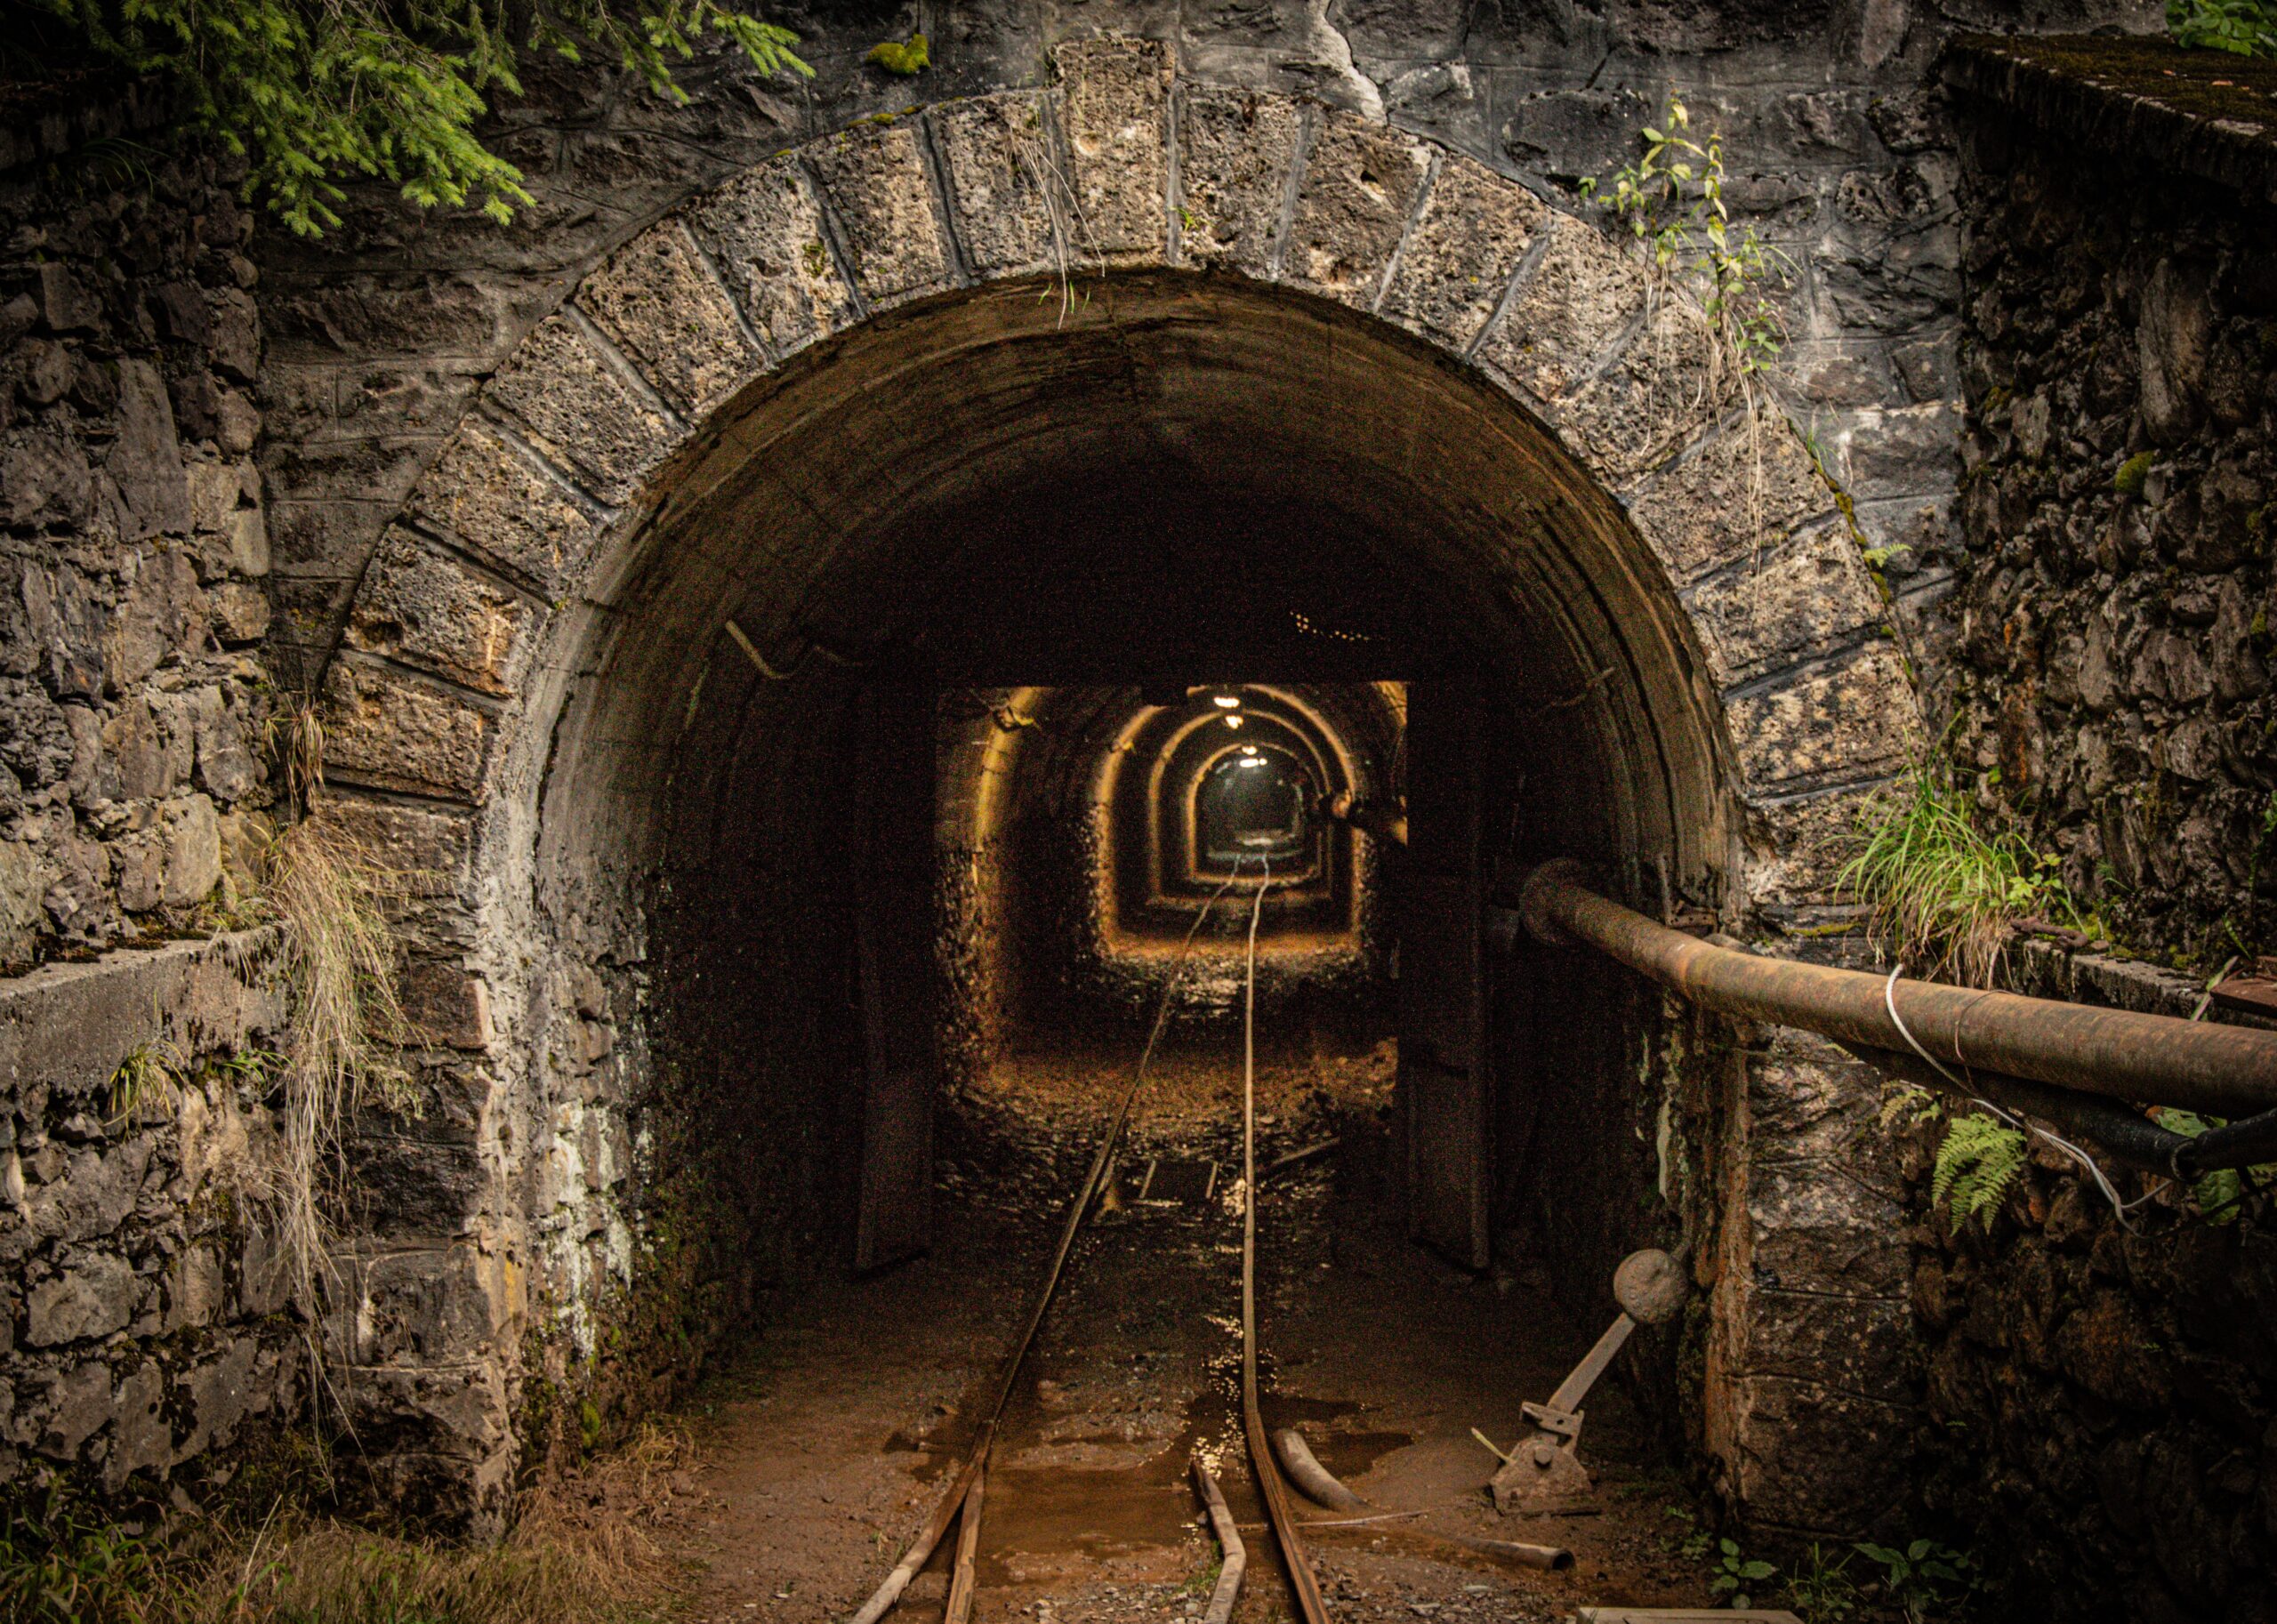 Entrance to a deep tunnel or mineshaft with some light rail tracks going deep into the vanishing point.